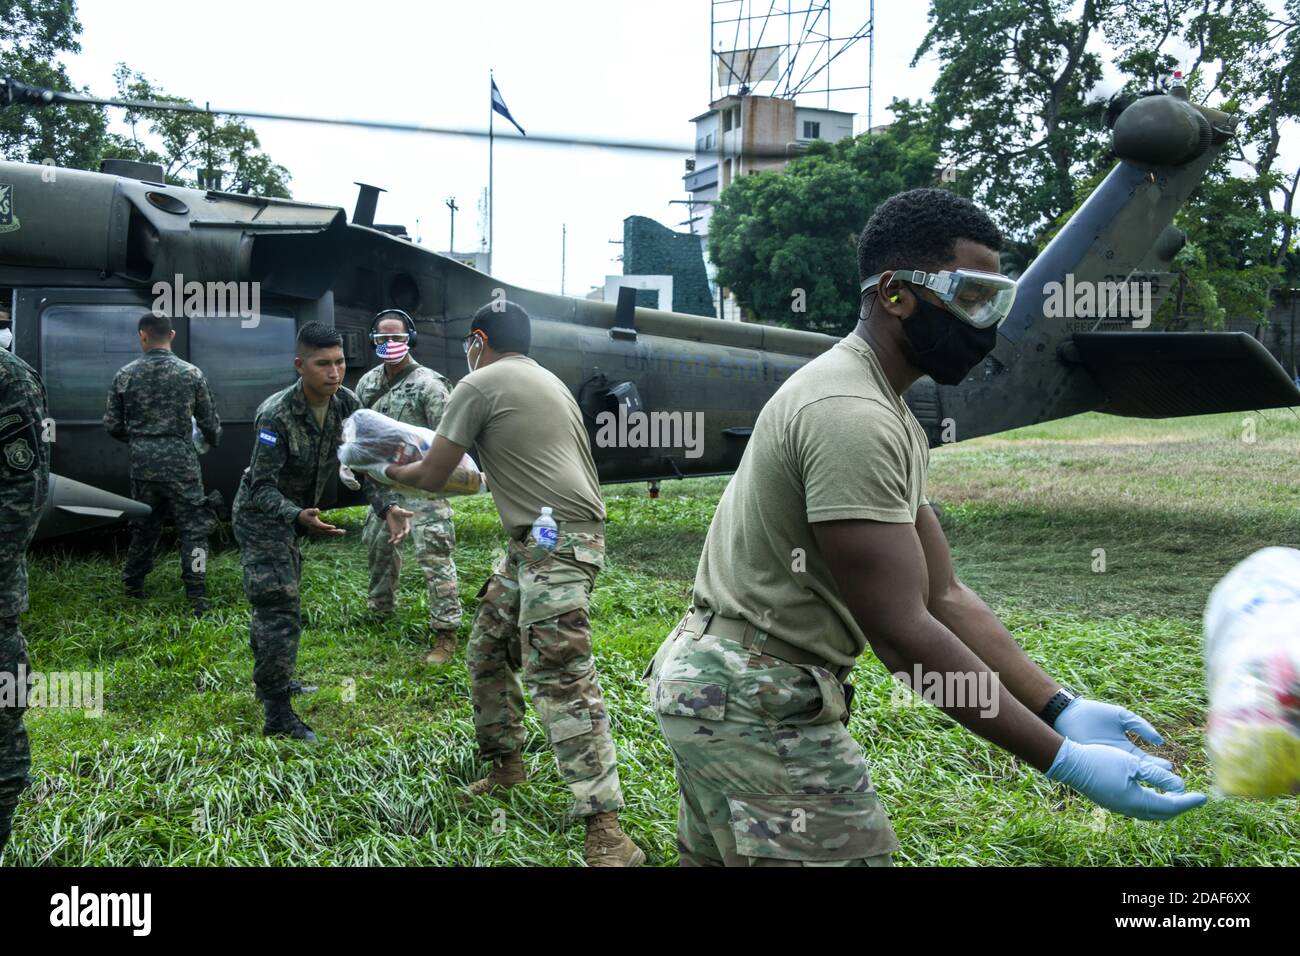 San Pedro Sula, Honduras. 11th Nov, 2020. U.S. Army Joint Task Force-Bravo soldiers and Honduran army load emergency supplies on to a U.S. Army HH-60 Black Hawk helicopter for delivery to regions affected by Hurricane Eta November 11, 2020 in San Pedro Sula, Honduras. The powerful cyclone killed at least 50 people and devastated parts of Nicaragua and Honduras. Credit: Planetpix/Alamy Live News Stock Photo